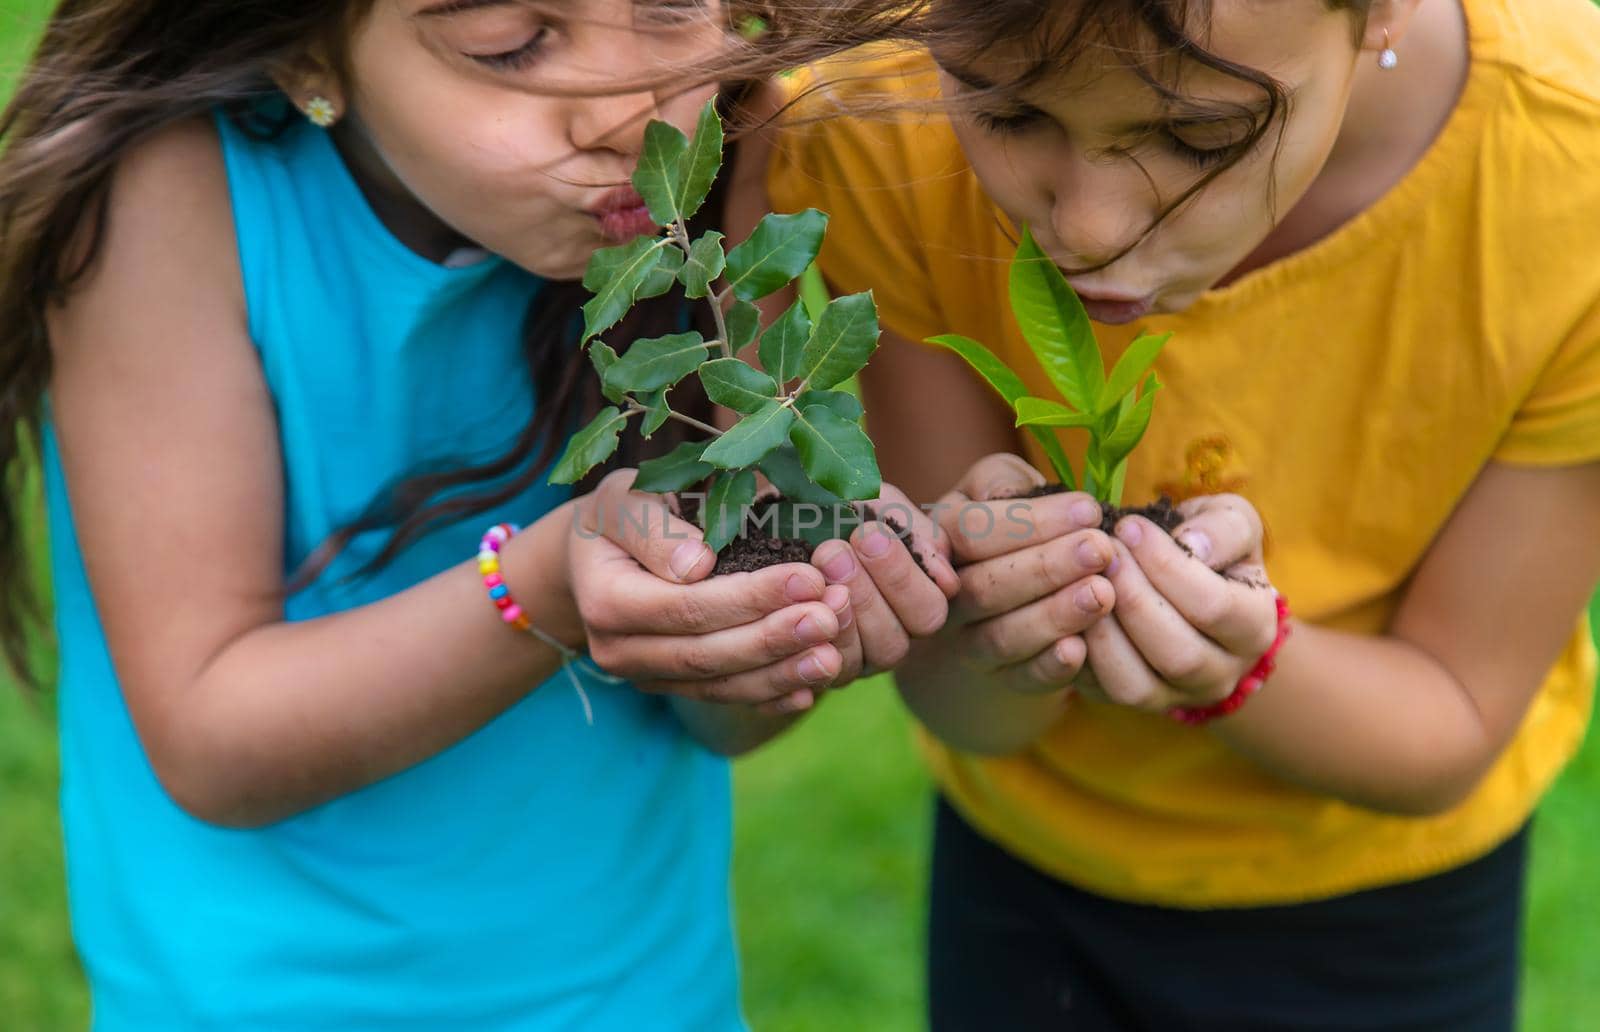 The child holds the plant and soil in his hands. Selective focus. Kid.